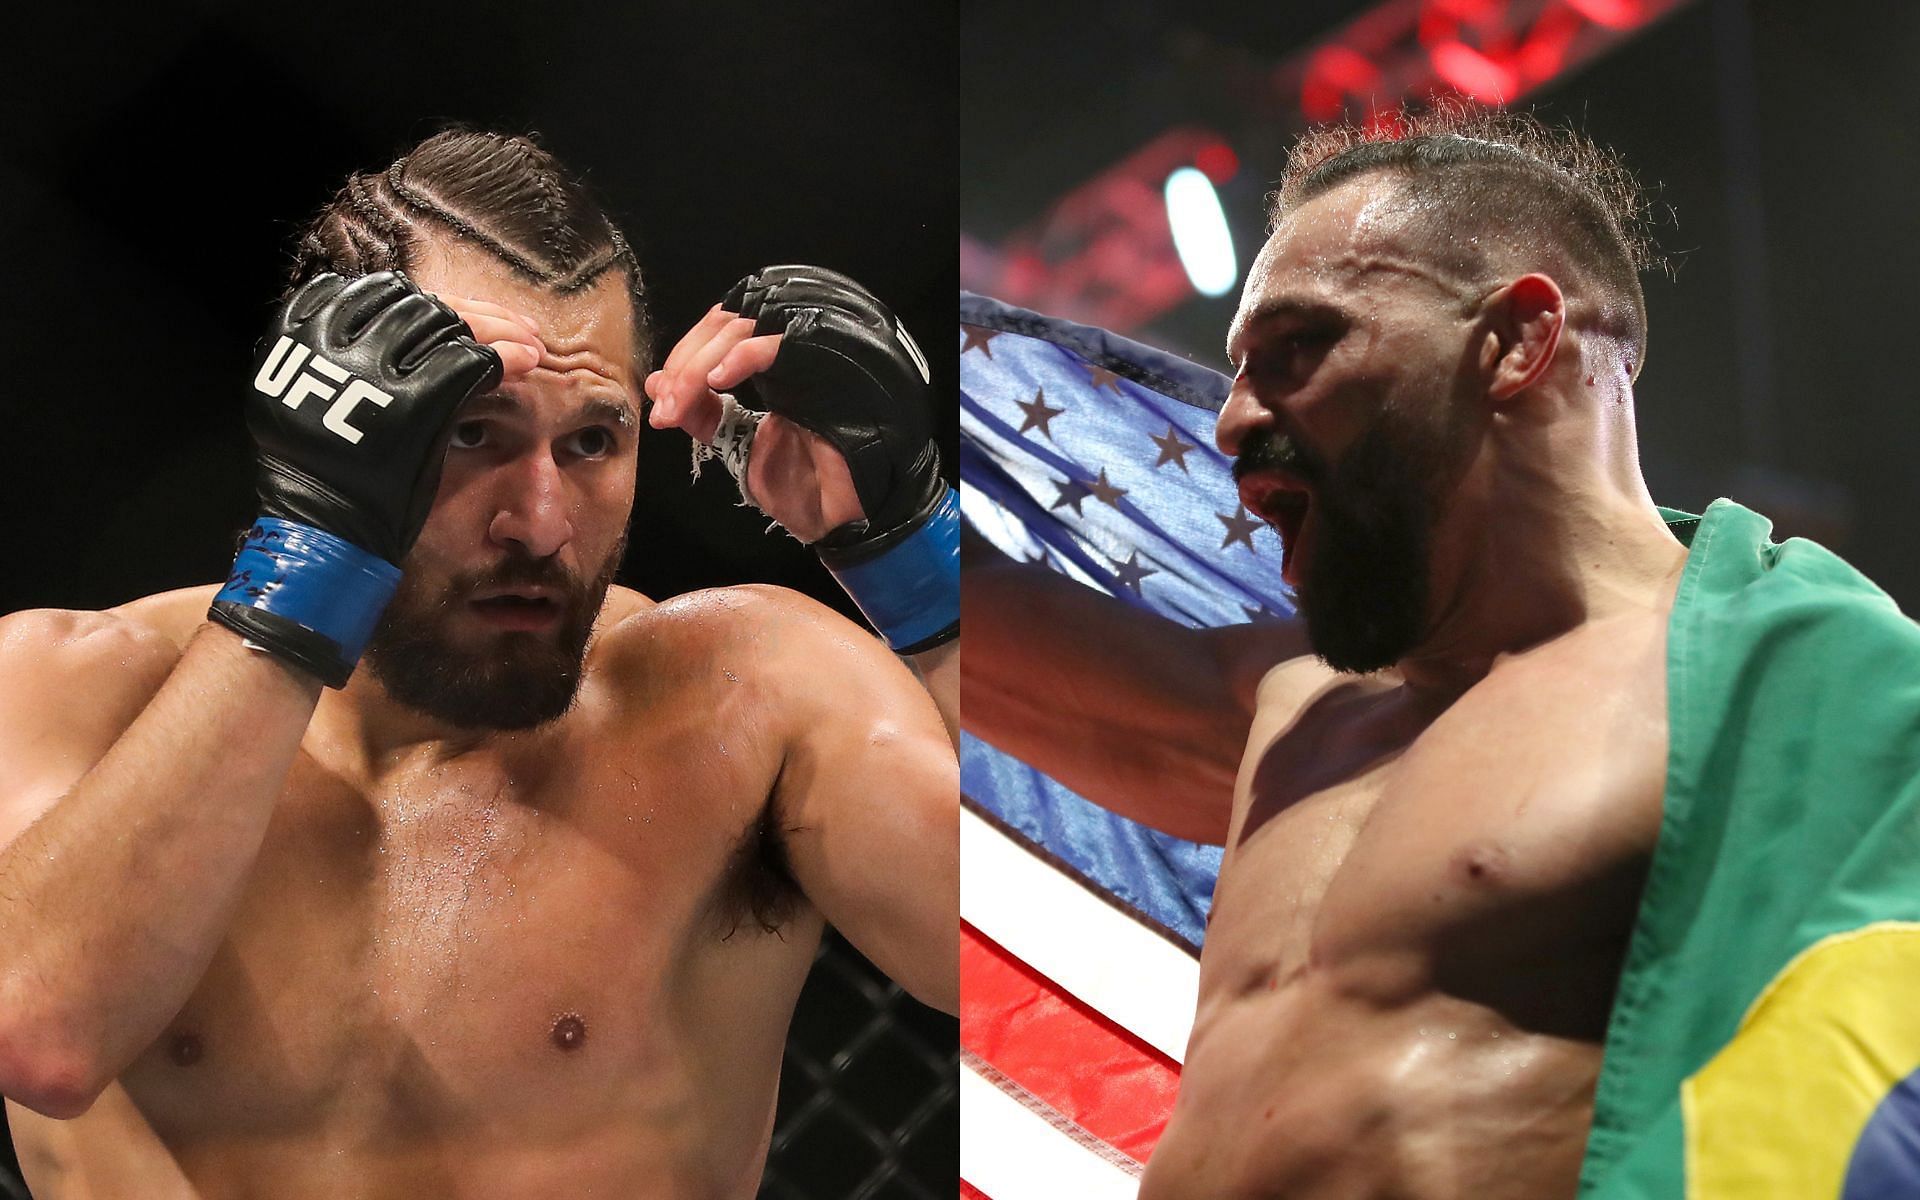 Michel Pereira (right) called out Jorge Masvidal (left) after his most recent win